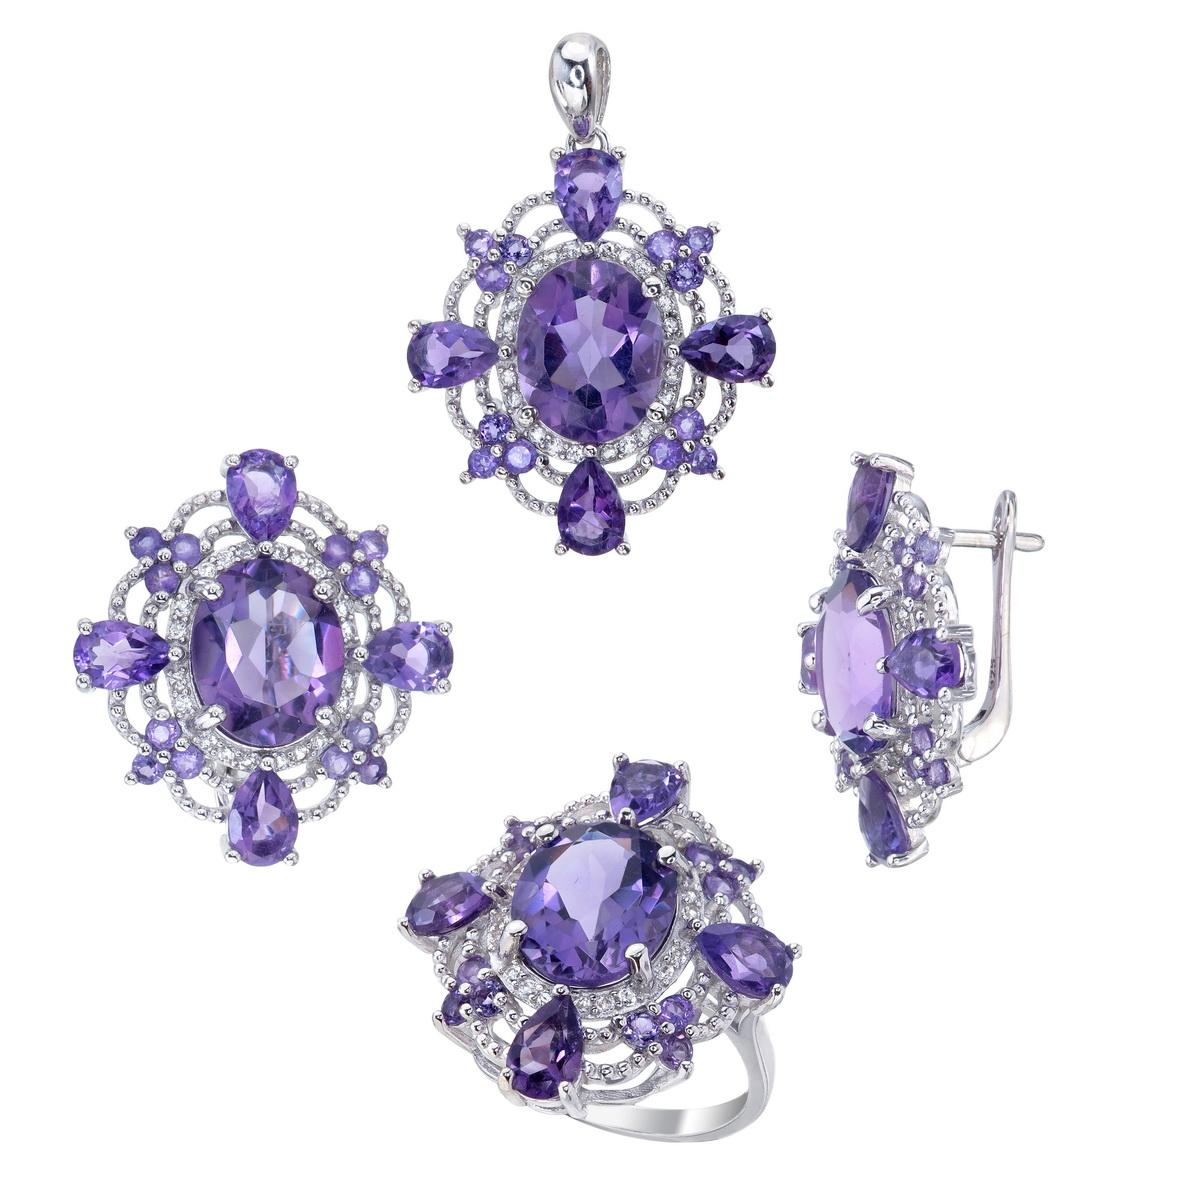 This sterling silver set with purple amethyst and white topazes is a timeless treasure,
Whether worn as a complete set or cherished as individual pieces, each element showcases the perfect blend of luxury and grace, making it an exquisite addition